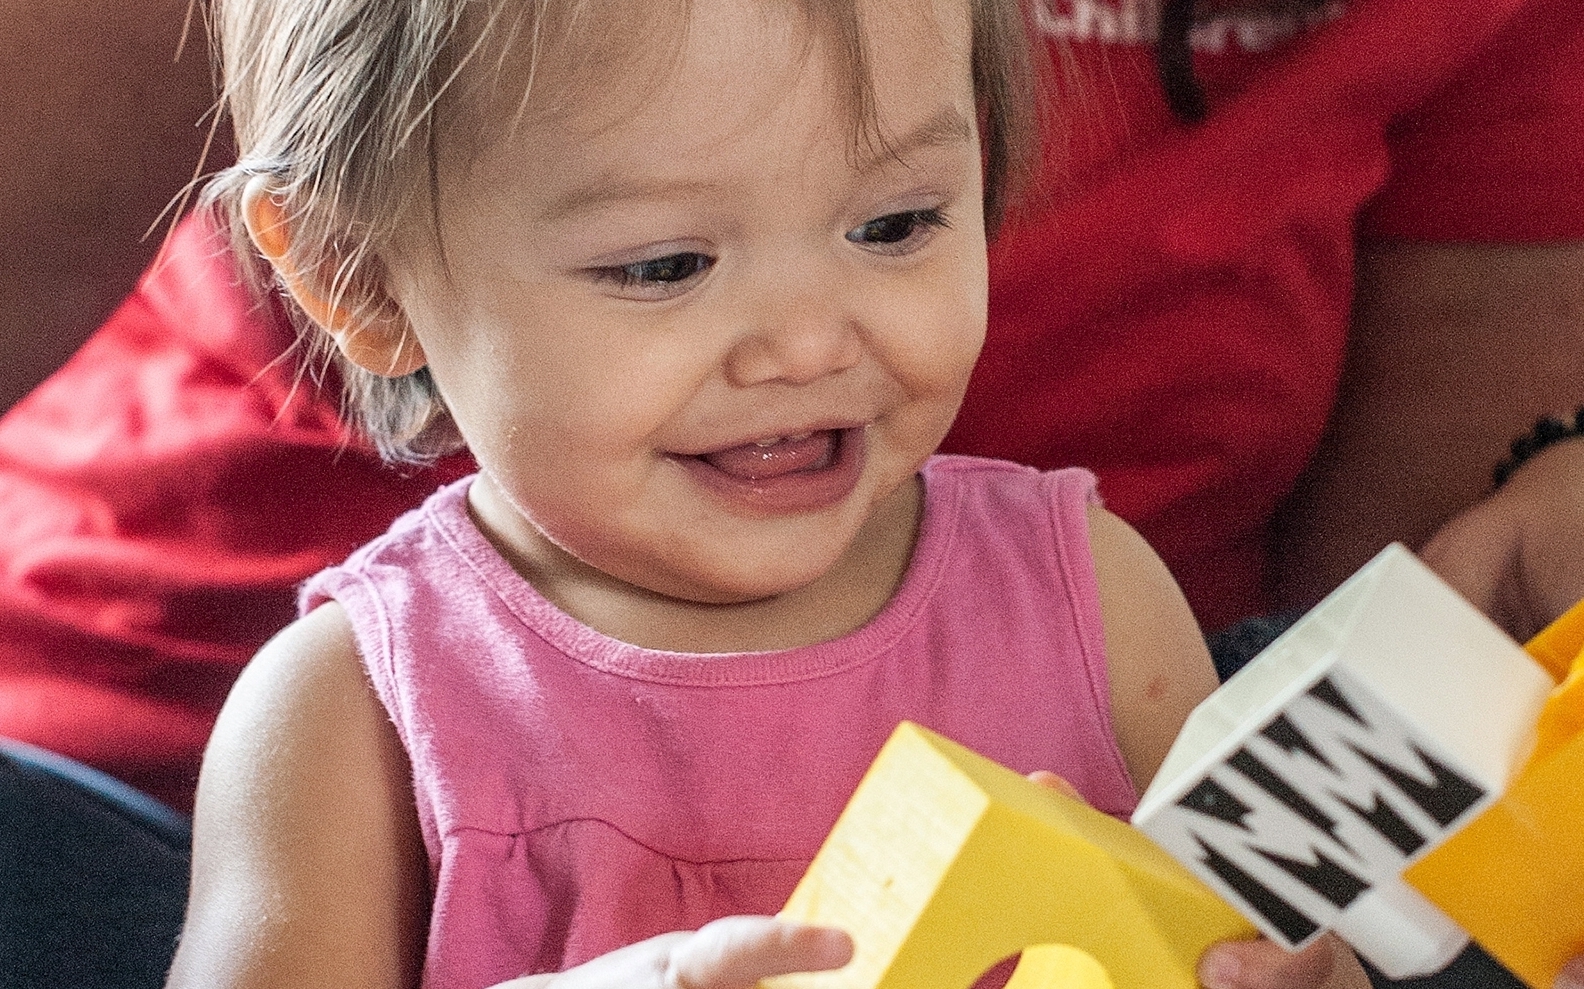 A young girl plays with yellow blocks.